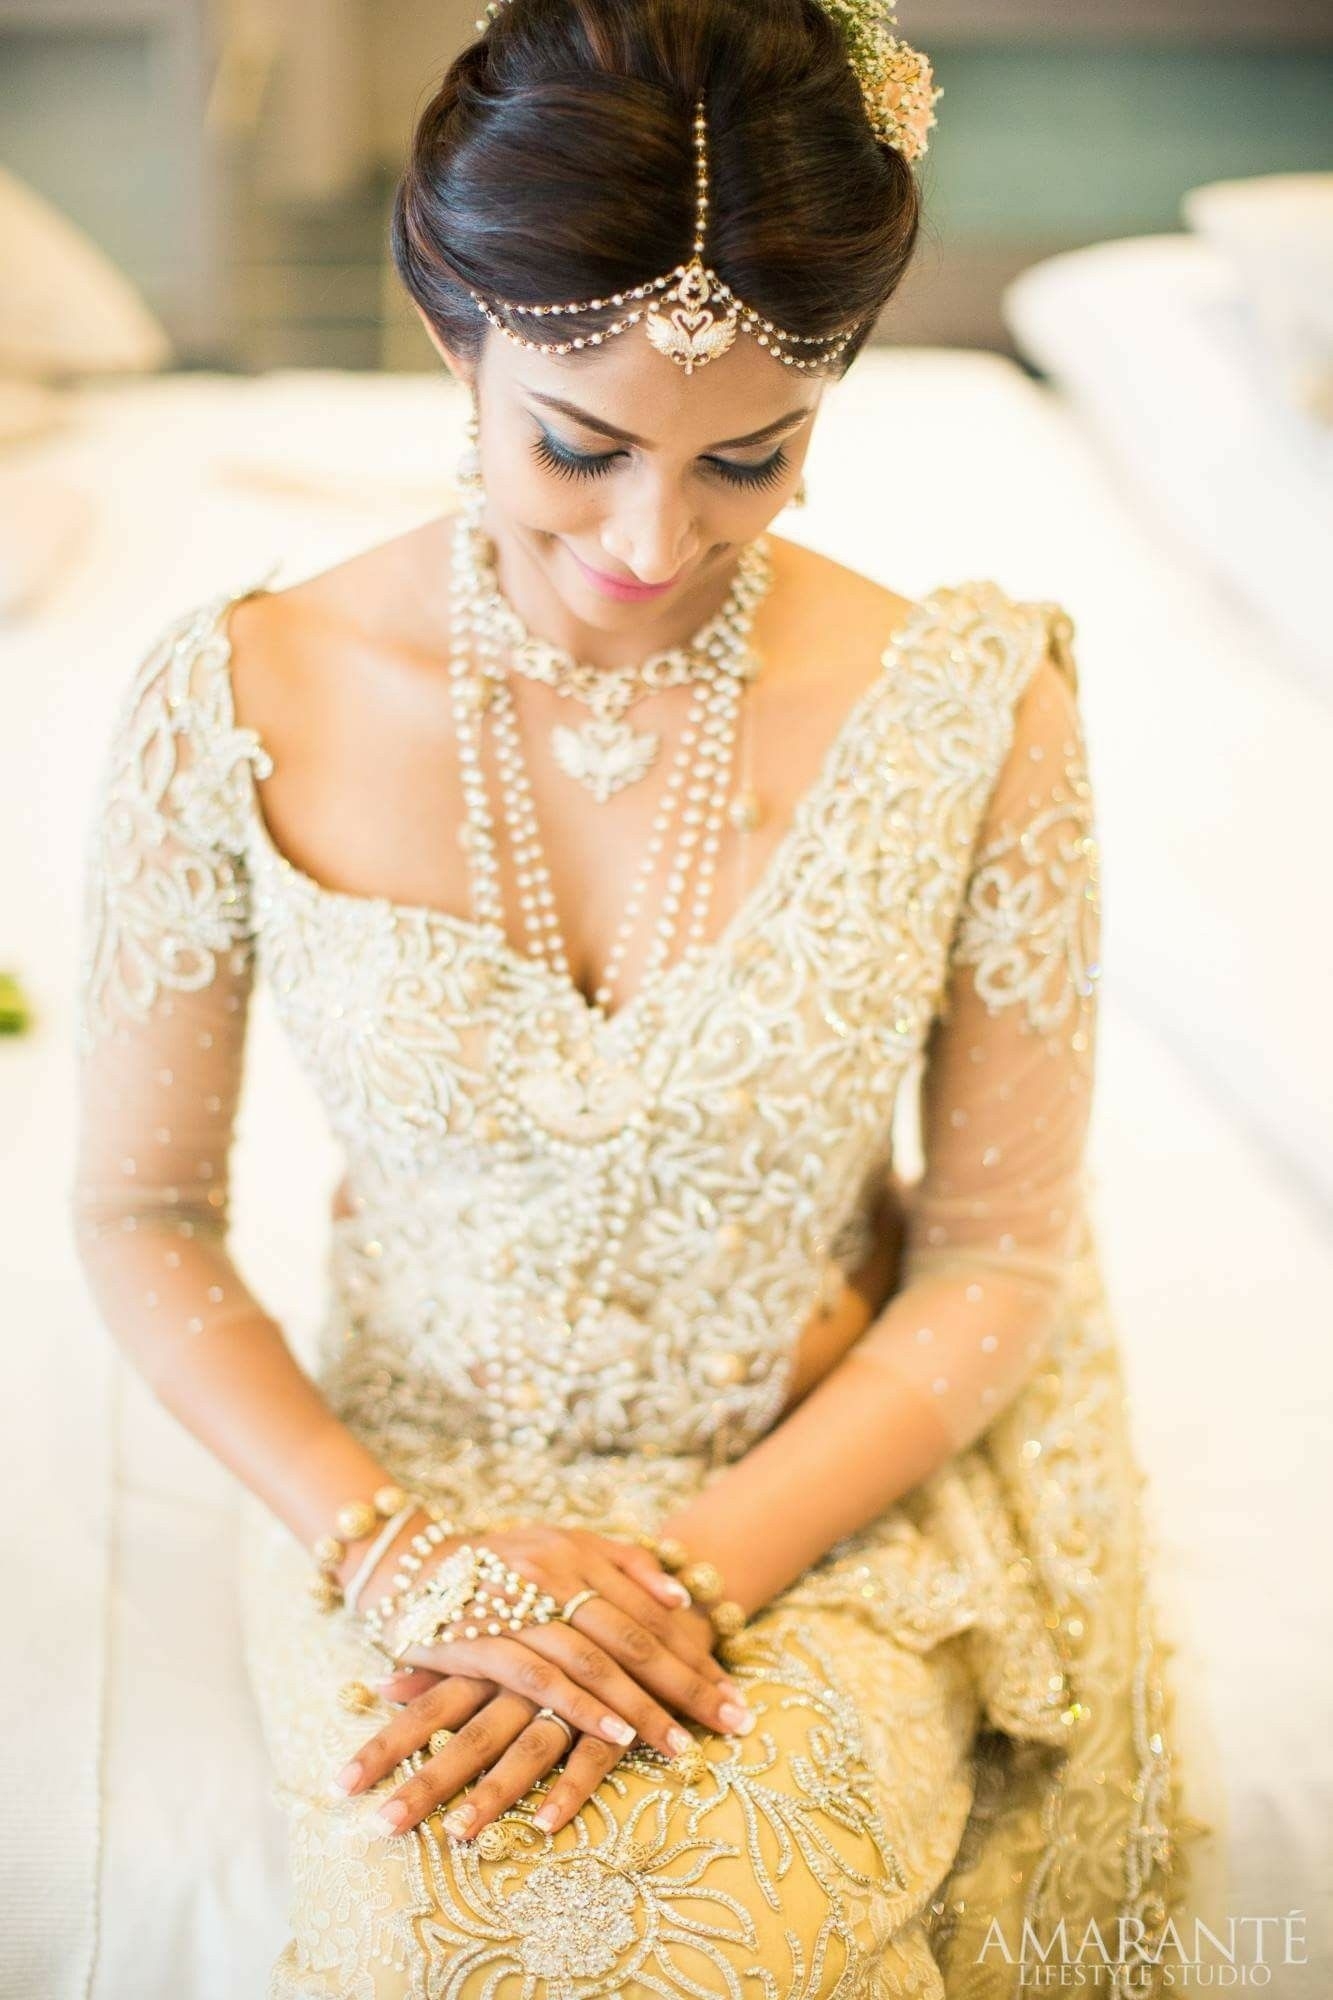 Like How This Bride Has A Modern Touch To Her Hair Without in Indian Bride Hairstyle For Short Hair In Saree